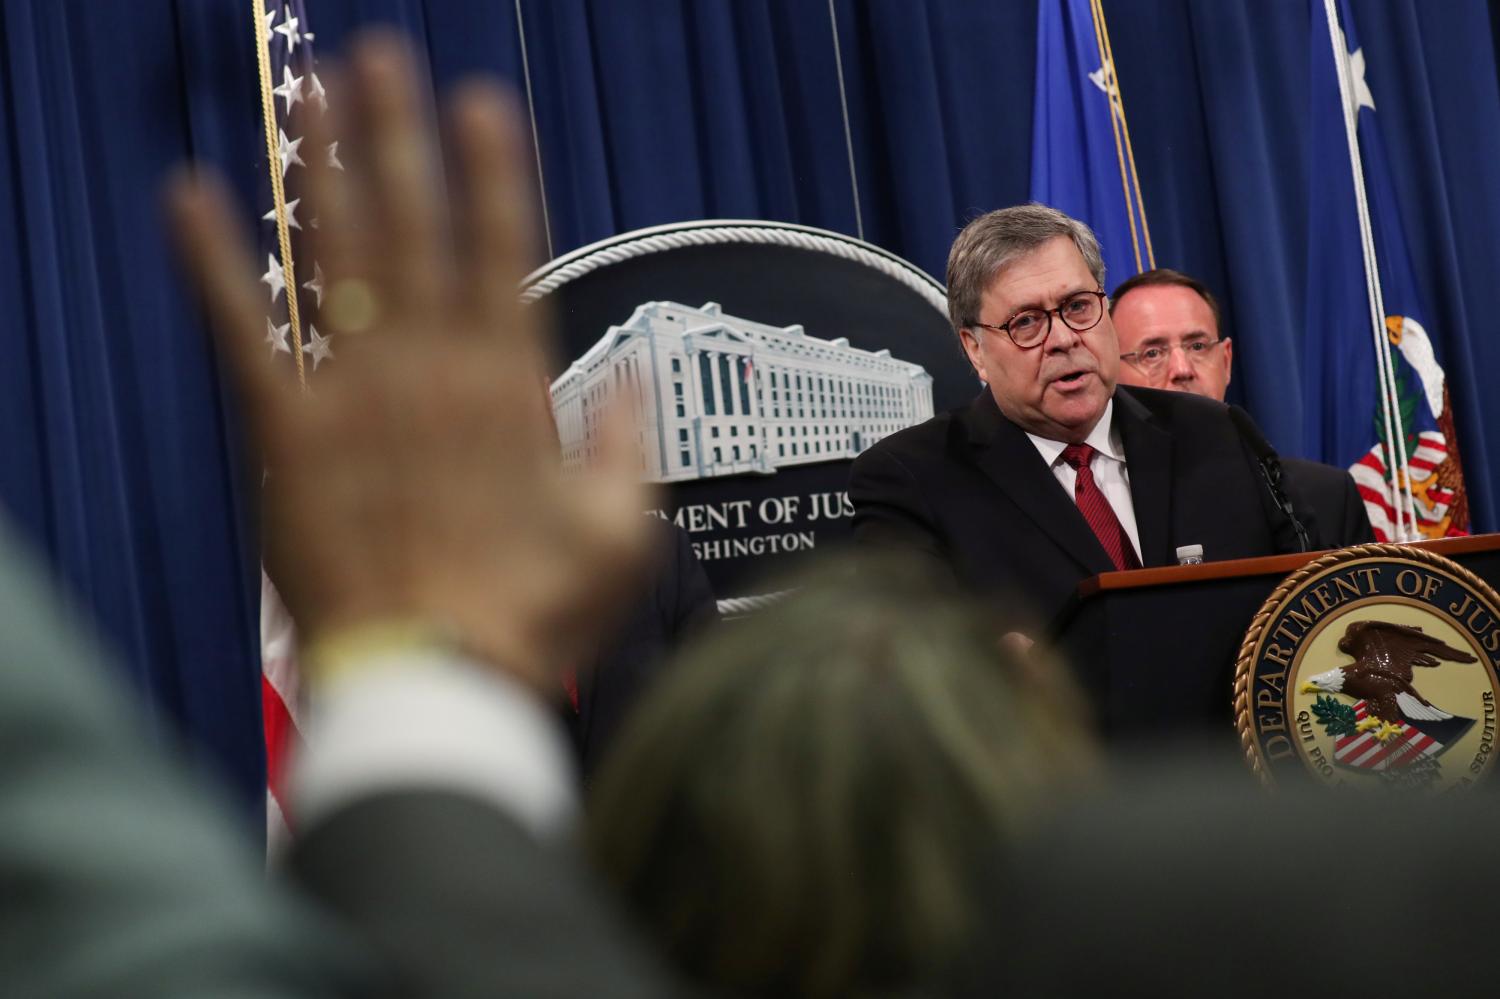 U.S. Attorney General William Barr, flanked by Deputy Attorney General Rod Rosenstein, speaks at a news conference to discuss Special Counsel Robert Mueller's report on Russian interference in the 2016 U.S. presidential race, in Washington, U.S., April 18, 2019. REUTERS/Jonathan Ernst - RC1E360BBAB0